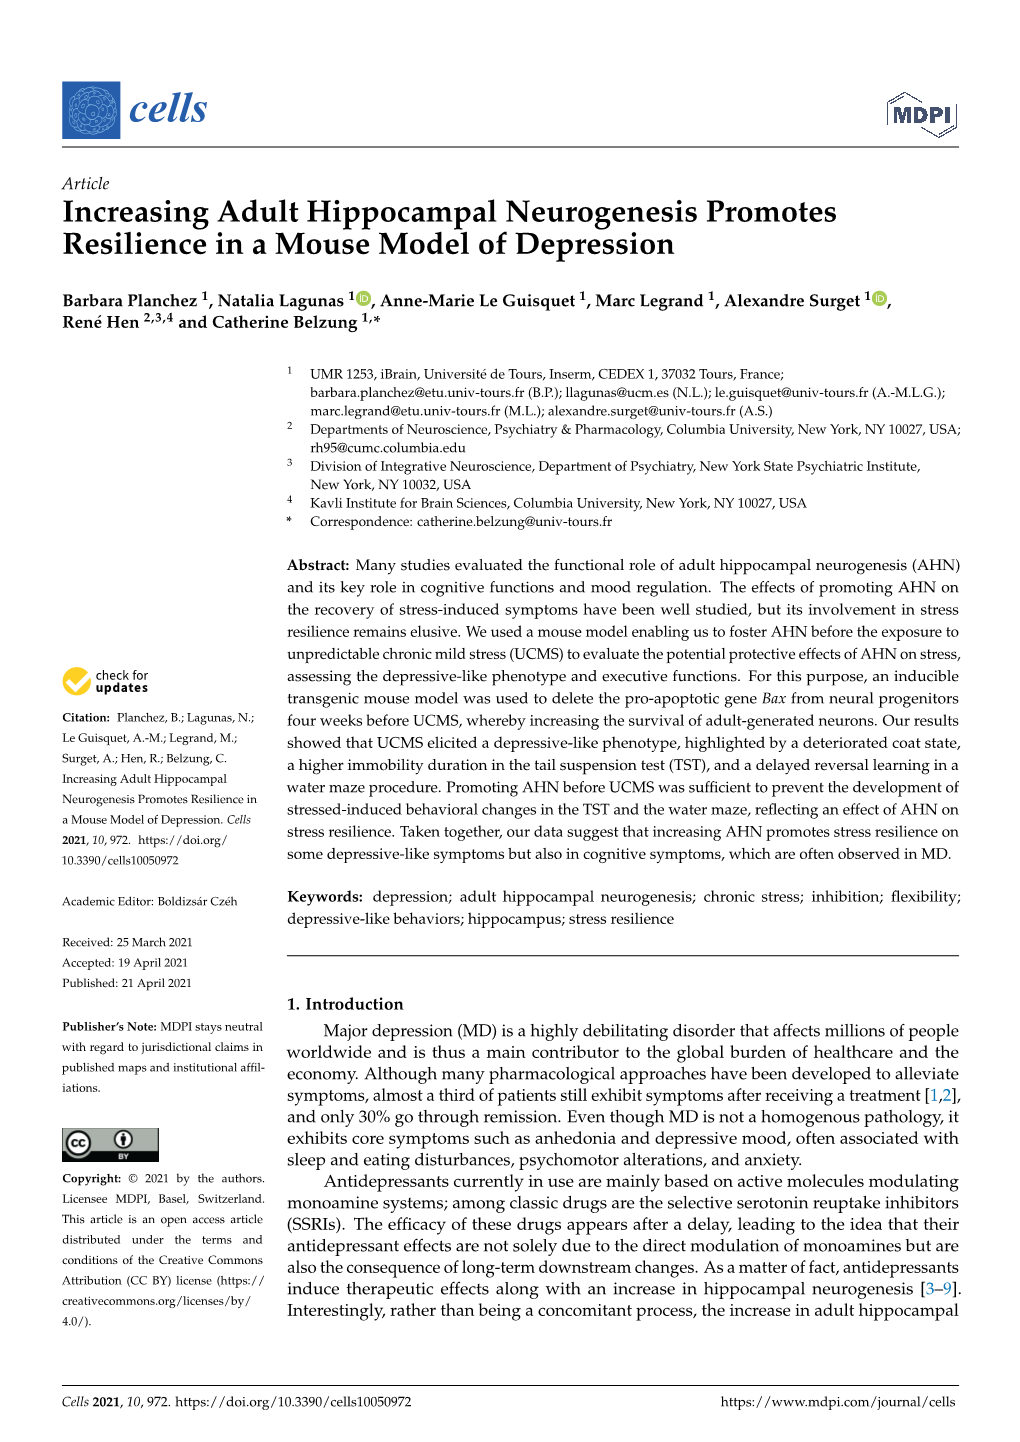 Increasing Adult Hippocampal Neurogenesis Promotes Resilience in a Mouse Model of Depression